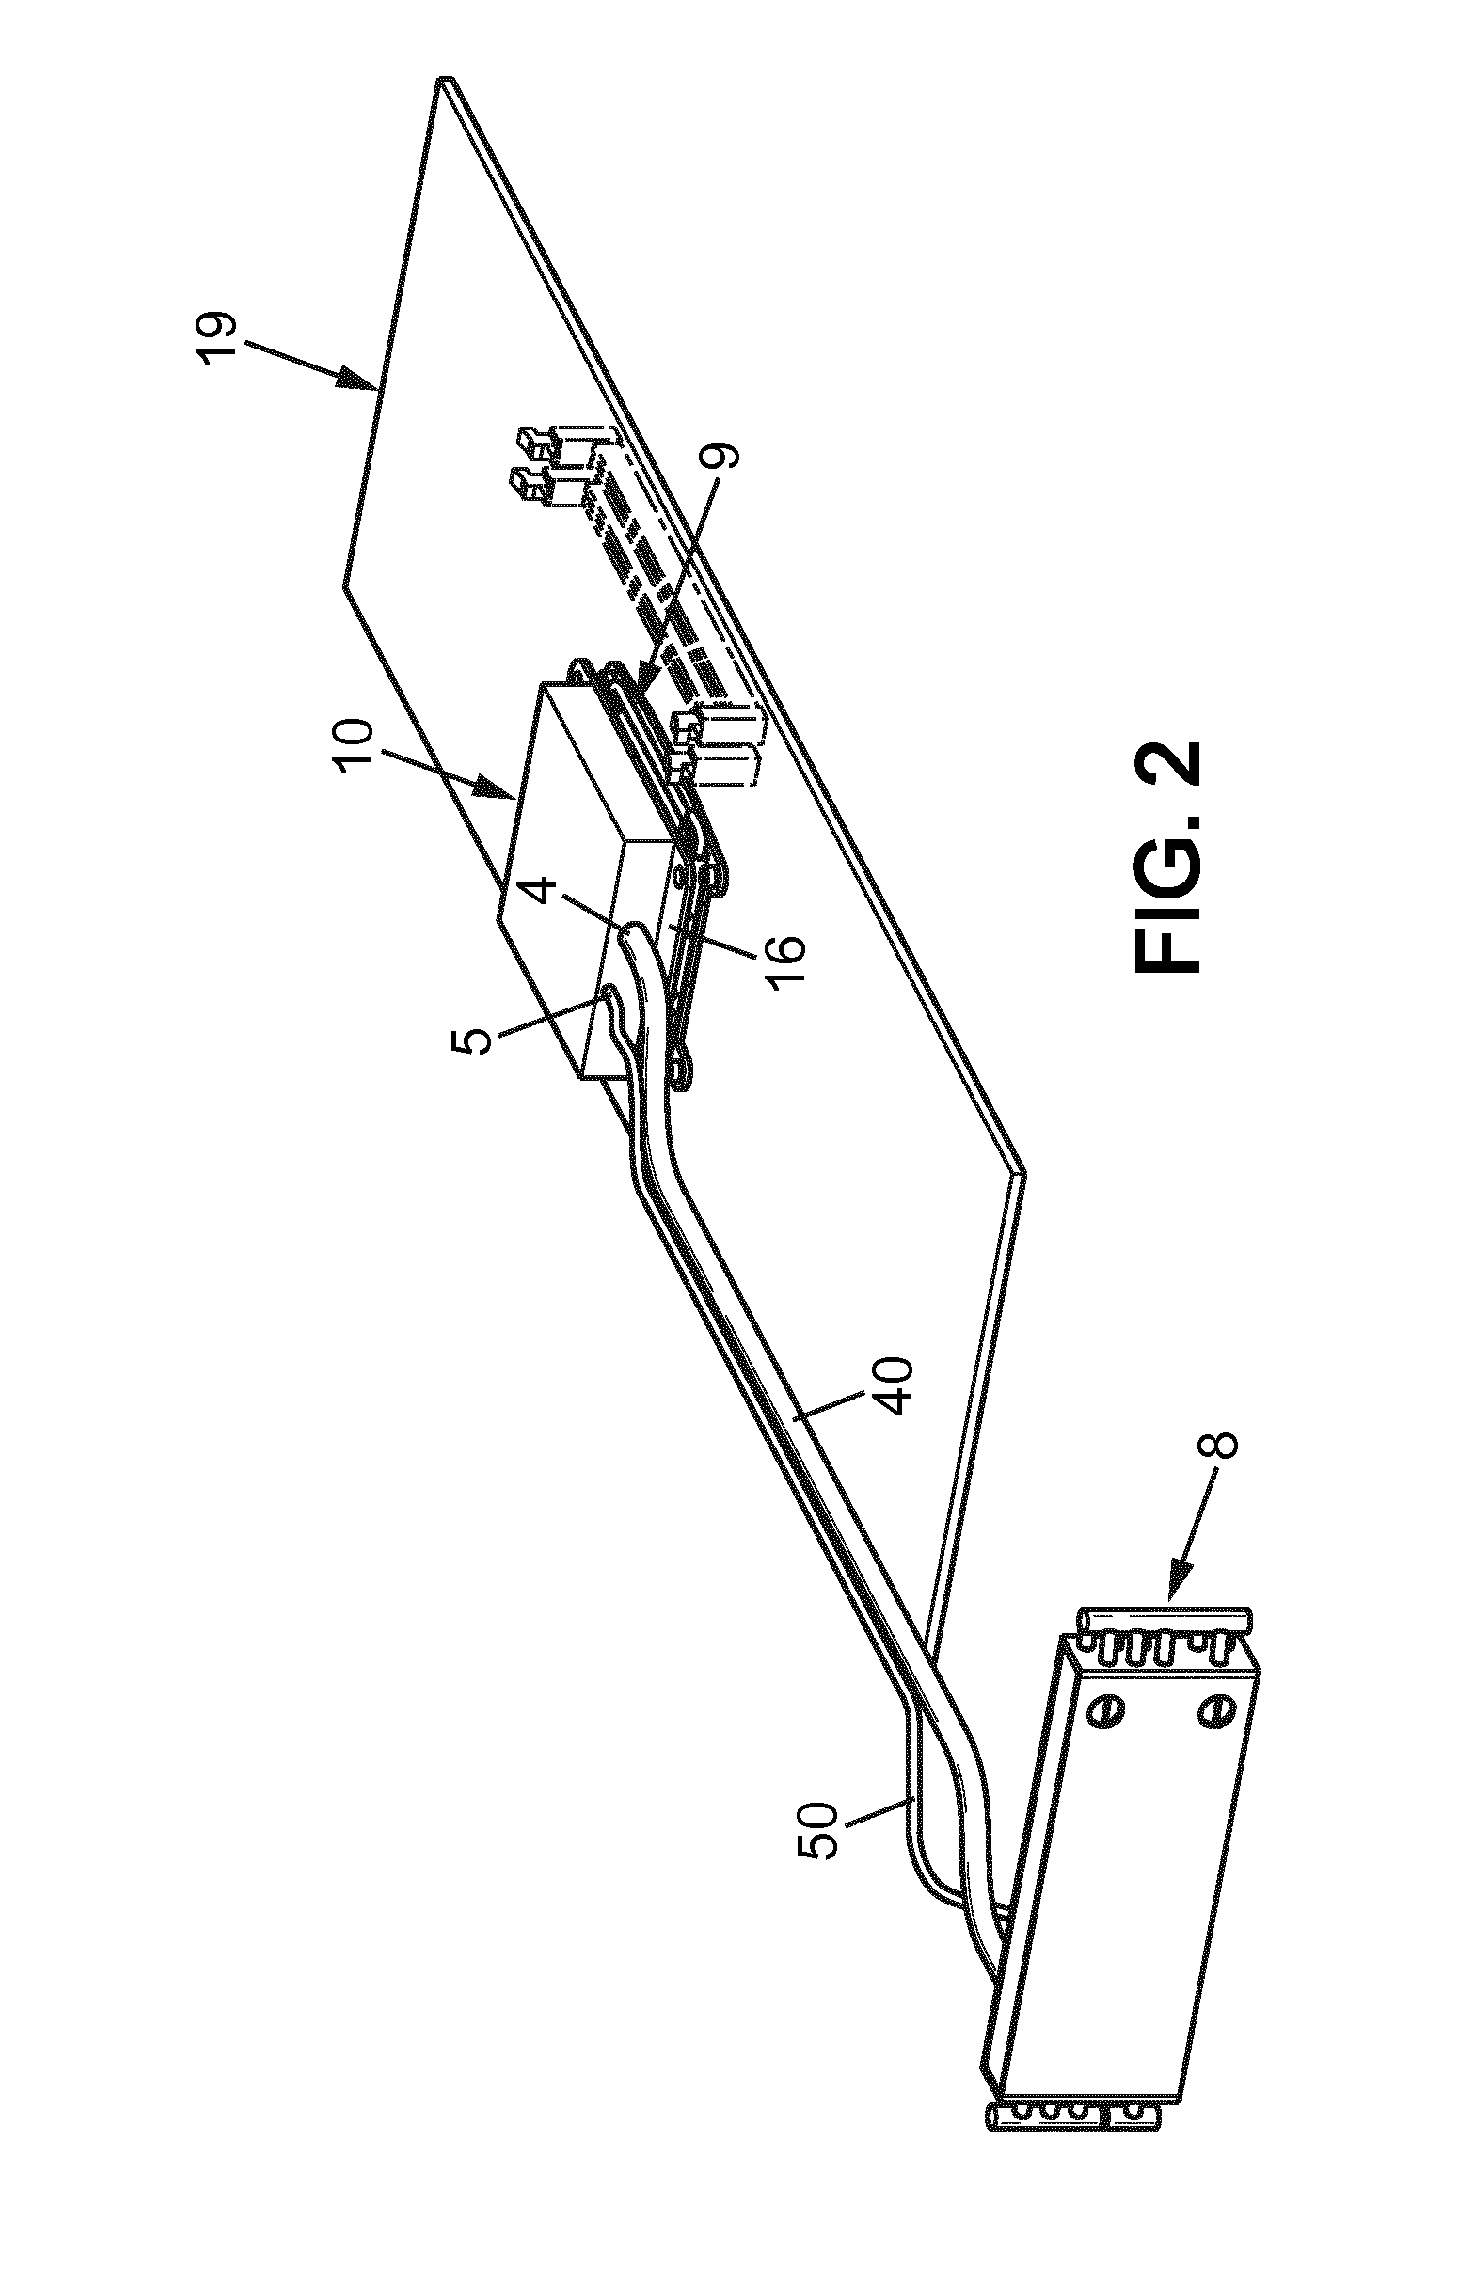 Evaporator with simplified assembly for diphasic loop